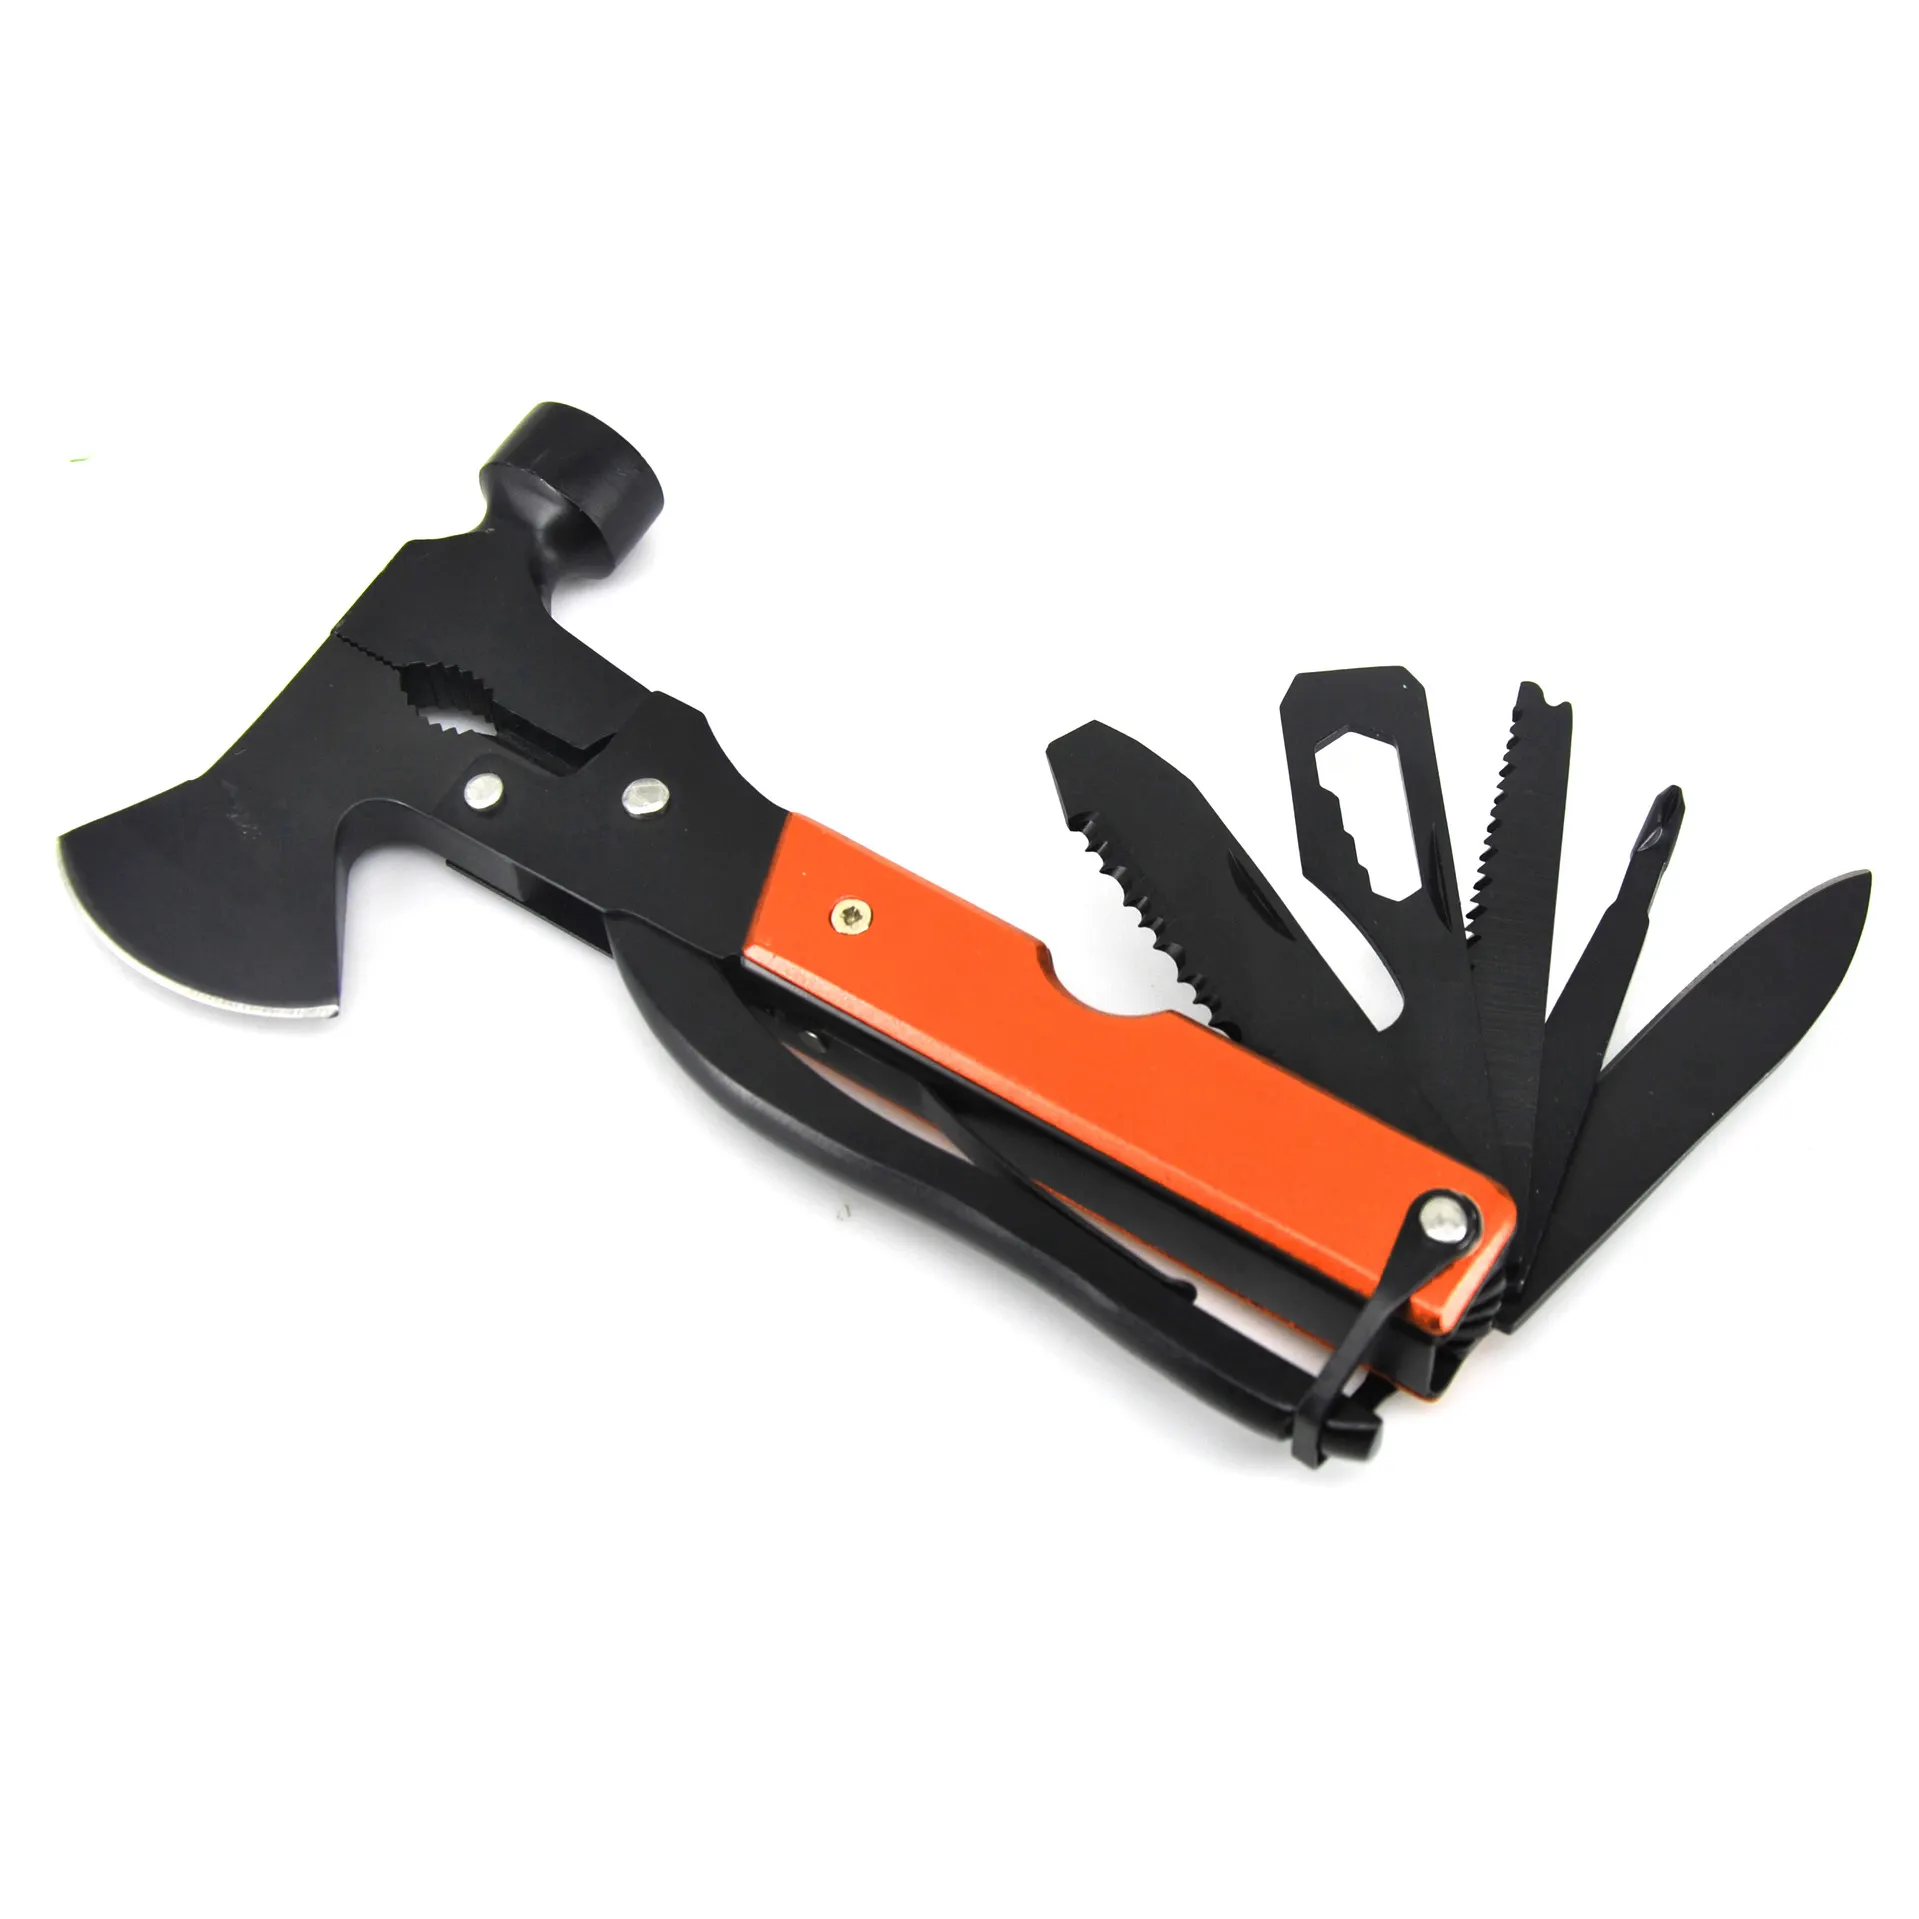 Camping Multitool,16in1 Portable Multi-Functional Axe Survival Gear kit for Vehicle,Hiking Fishing Outdoor Hunting